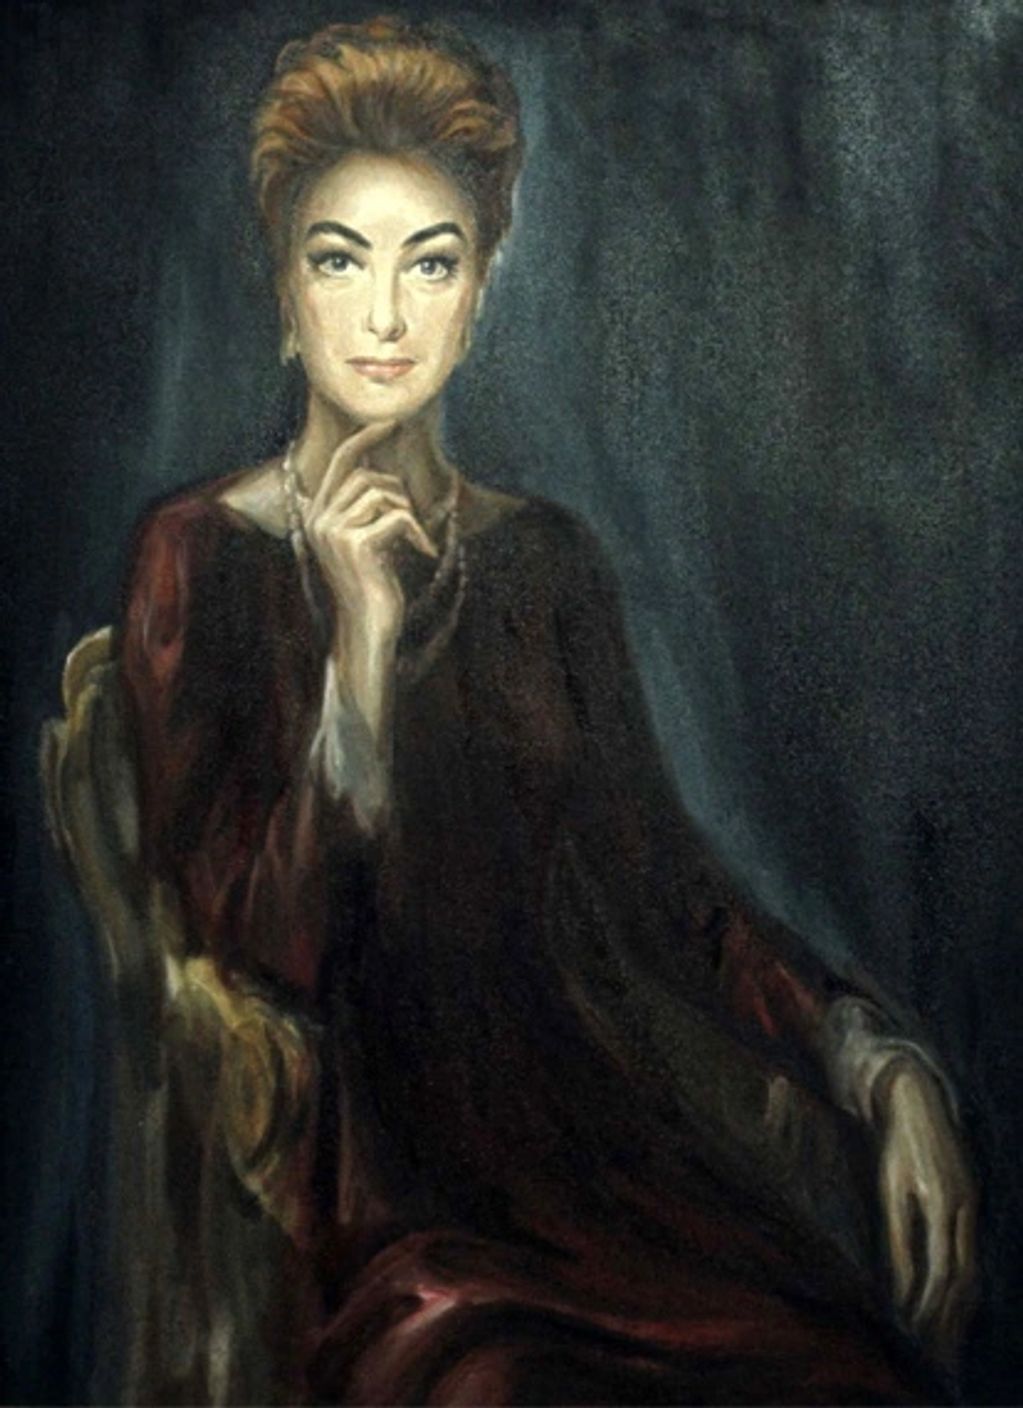 The most recent auction of Jaroslav Gebr's work was of Joan Crawford's painting used in Night Galler